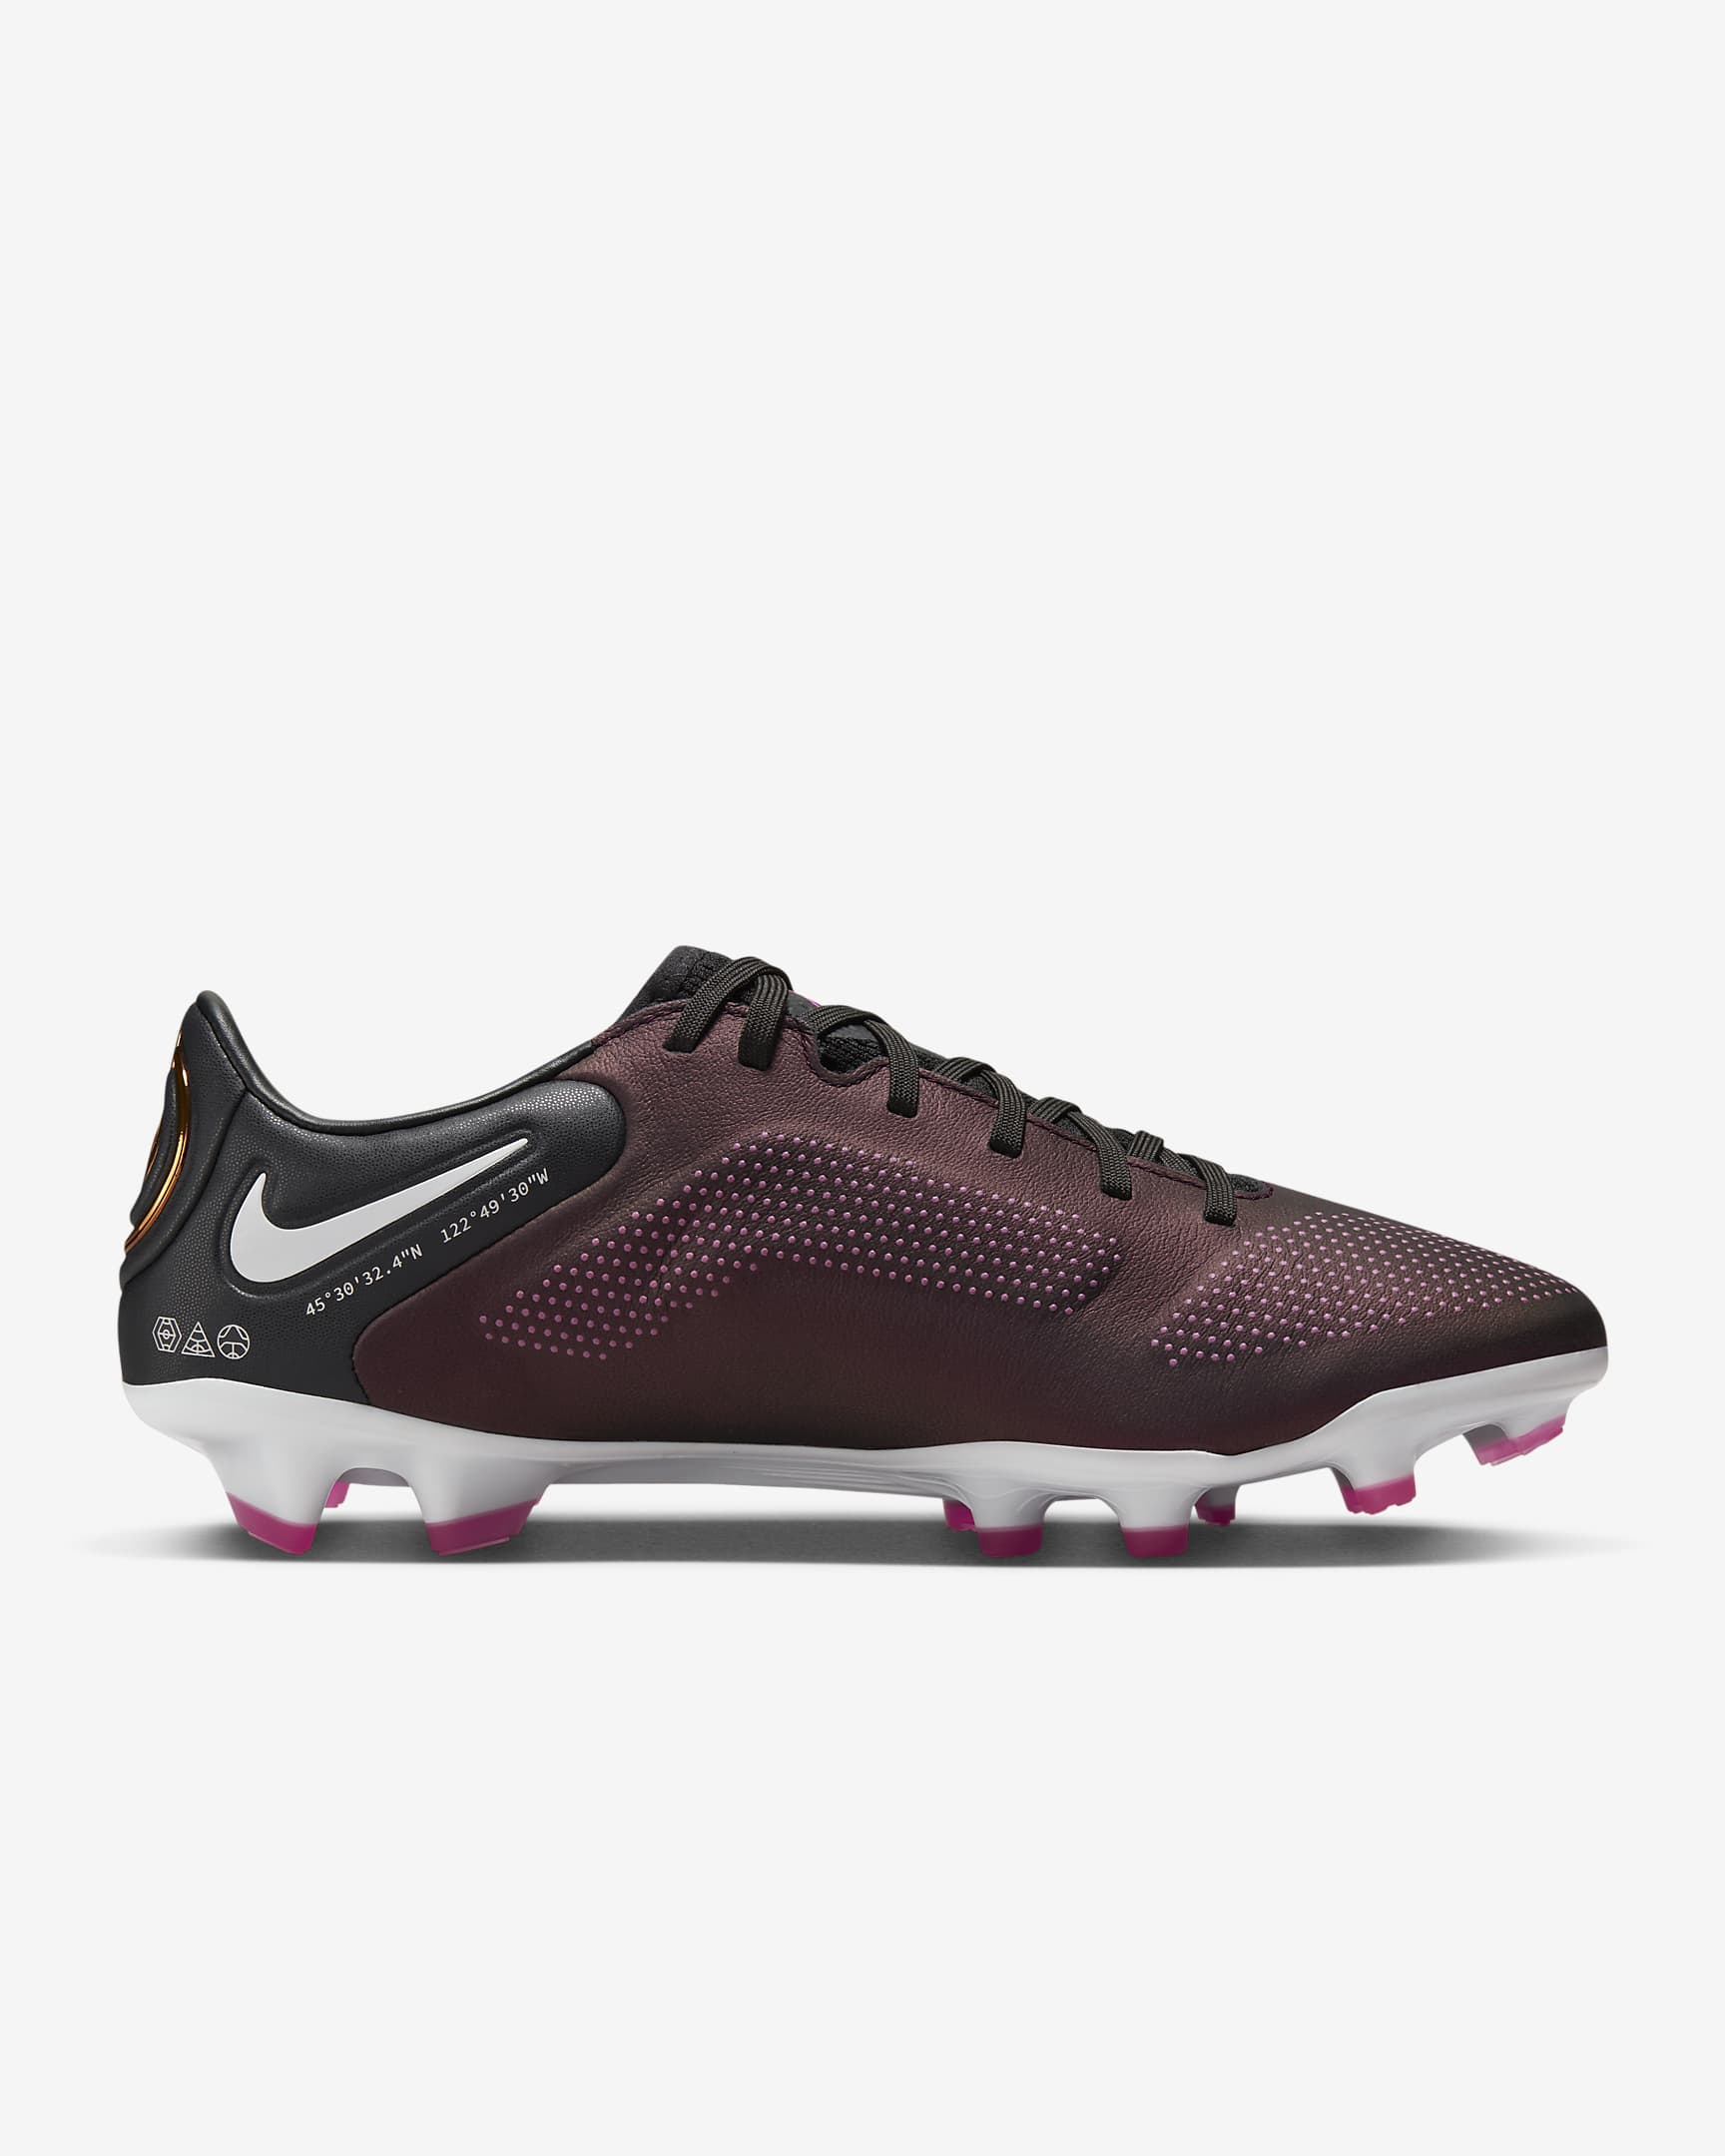 Nike Tiempo Legend Pro FG Firm-Ground Cleats